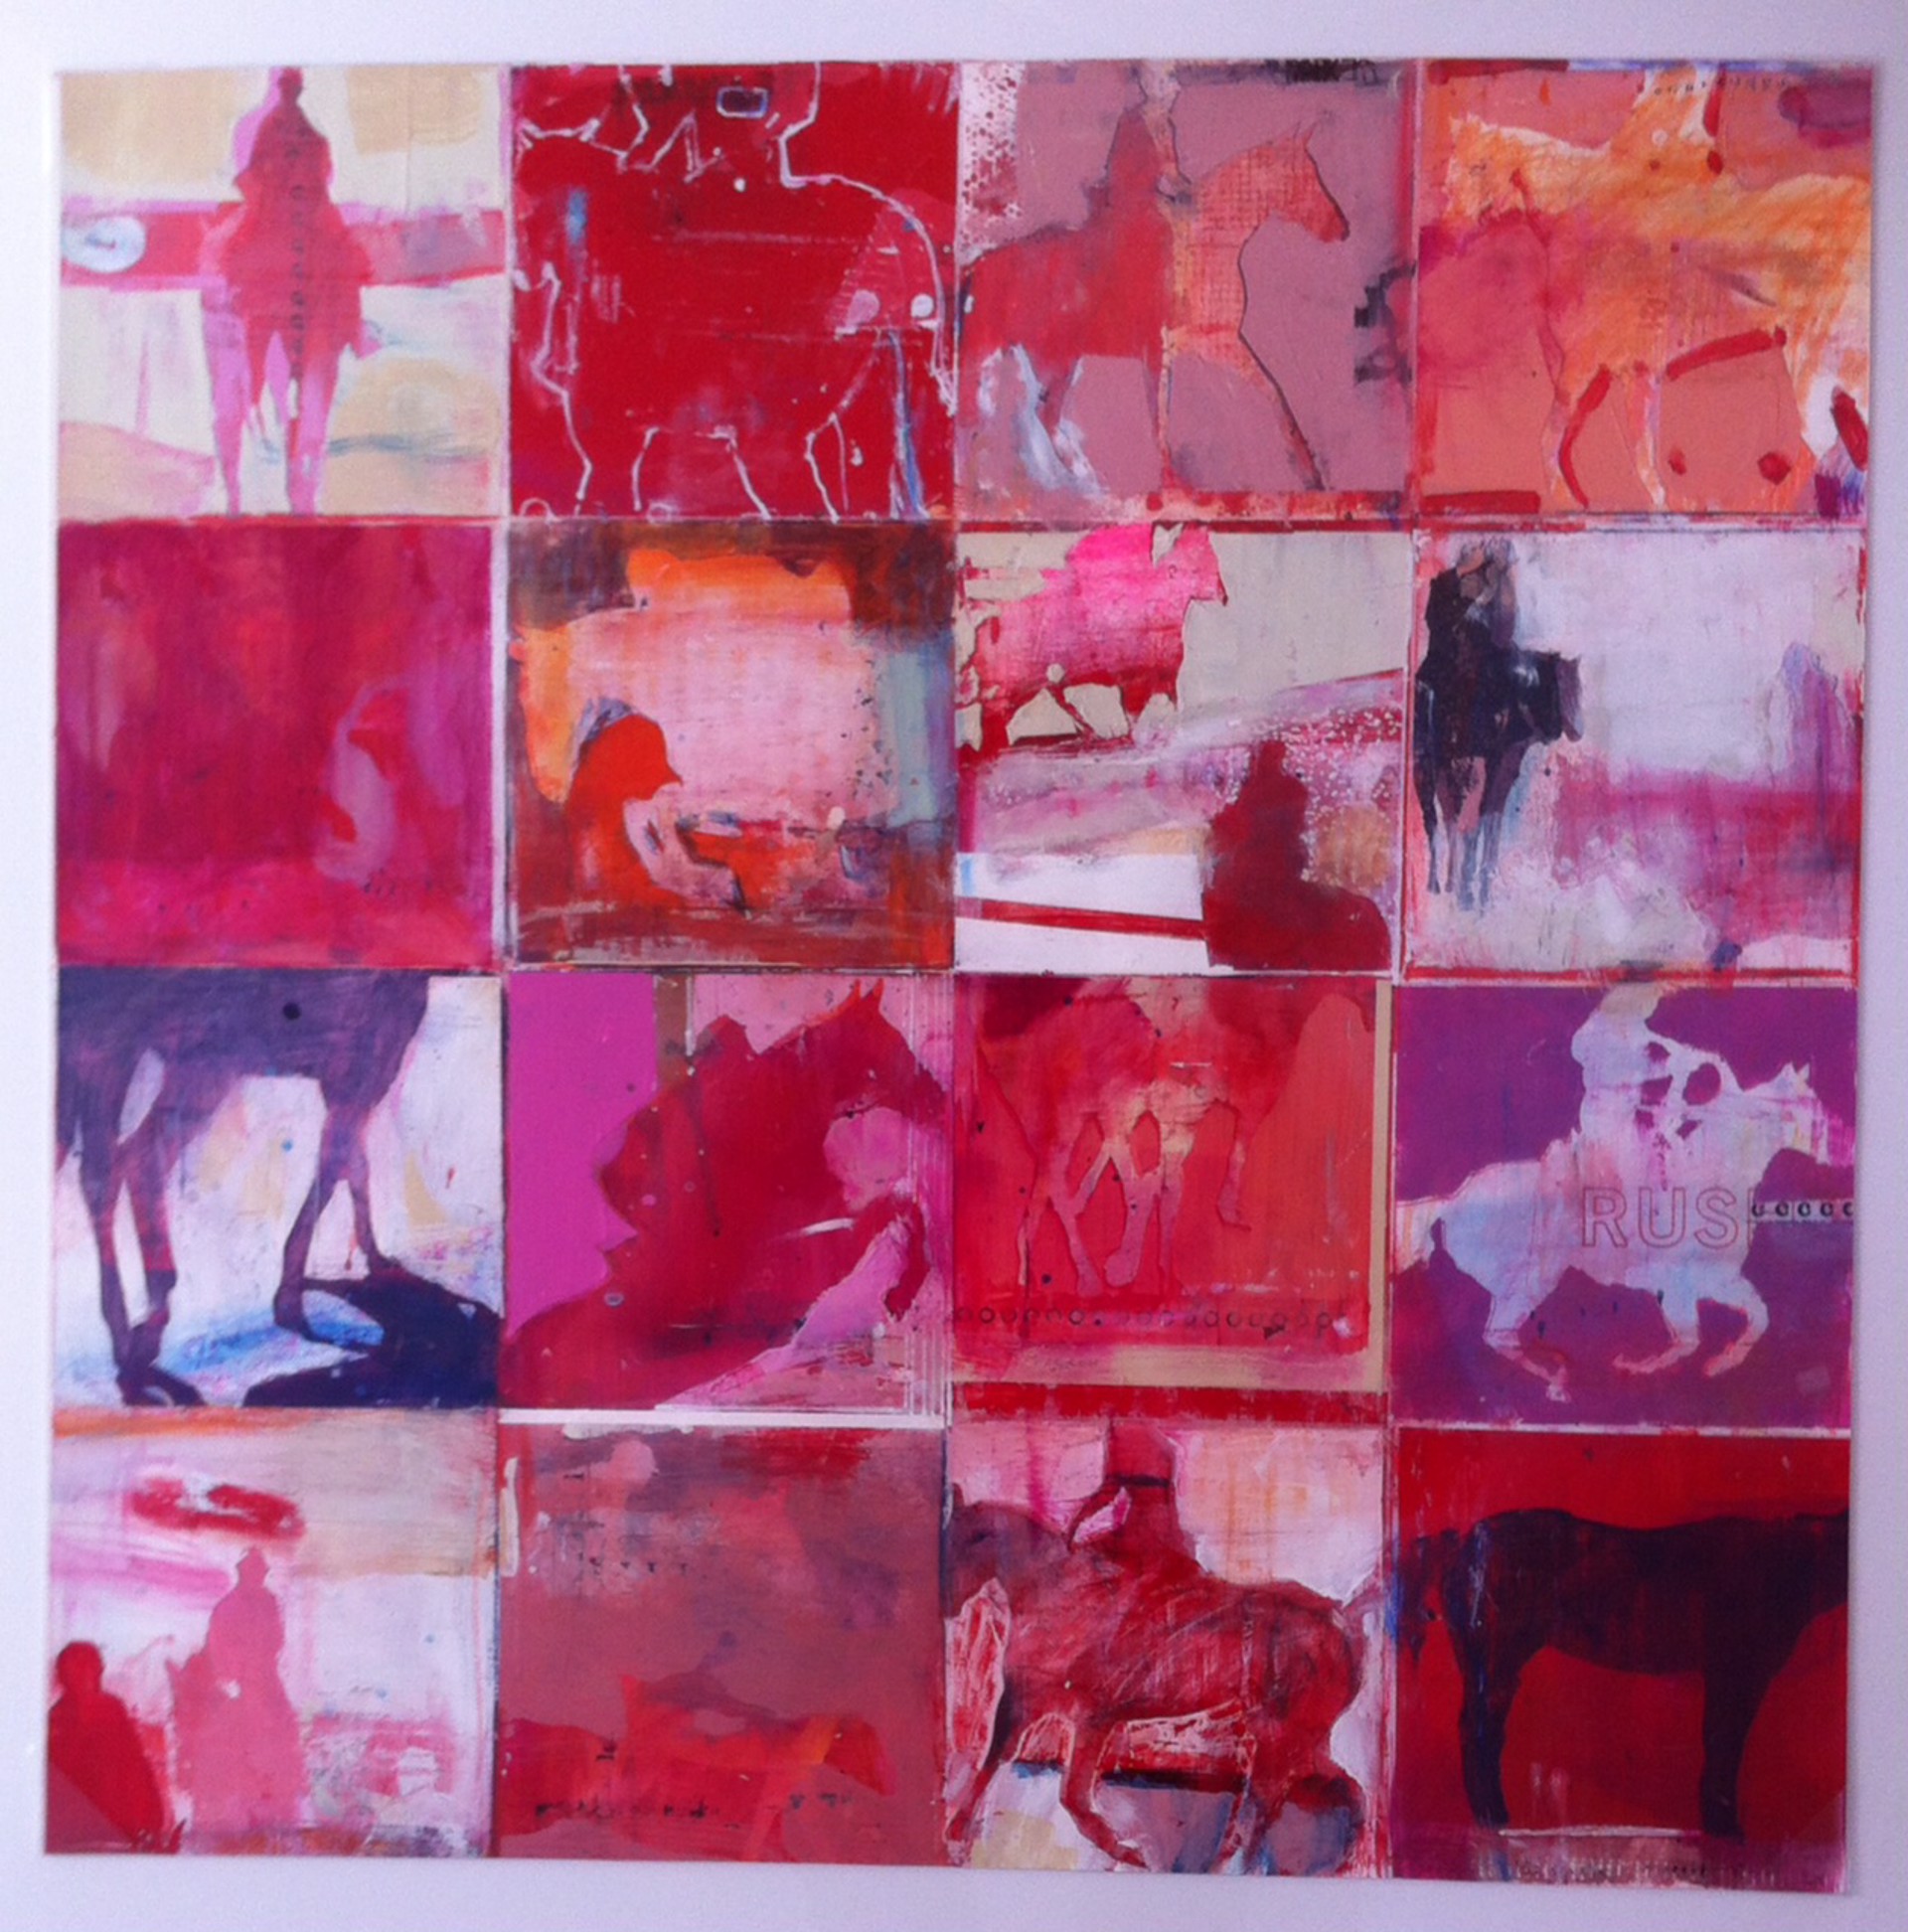 Reds in overdrive: Horse Grid by Kim Frohsin